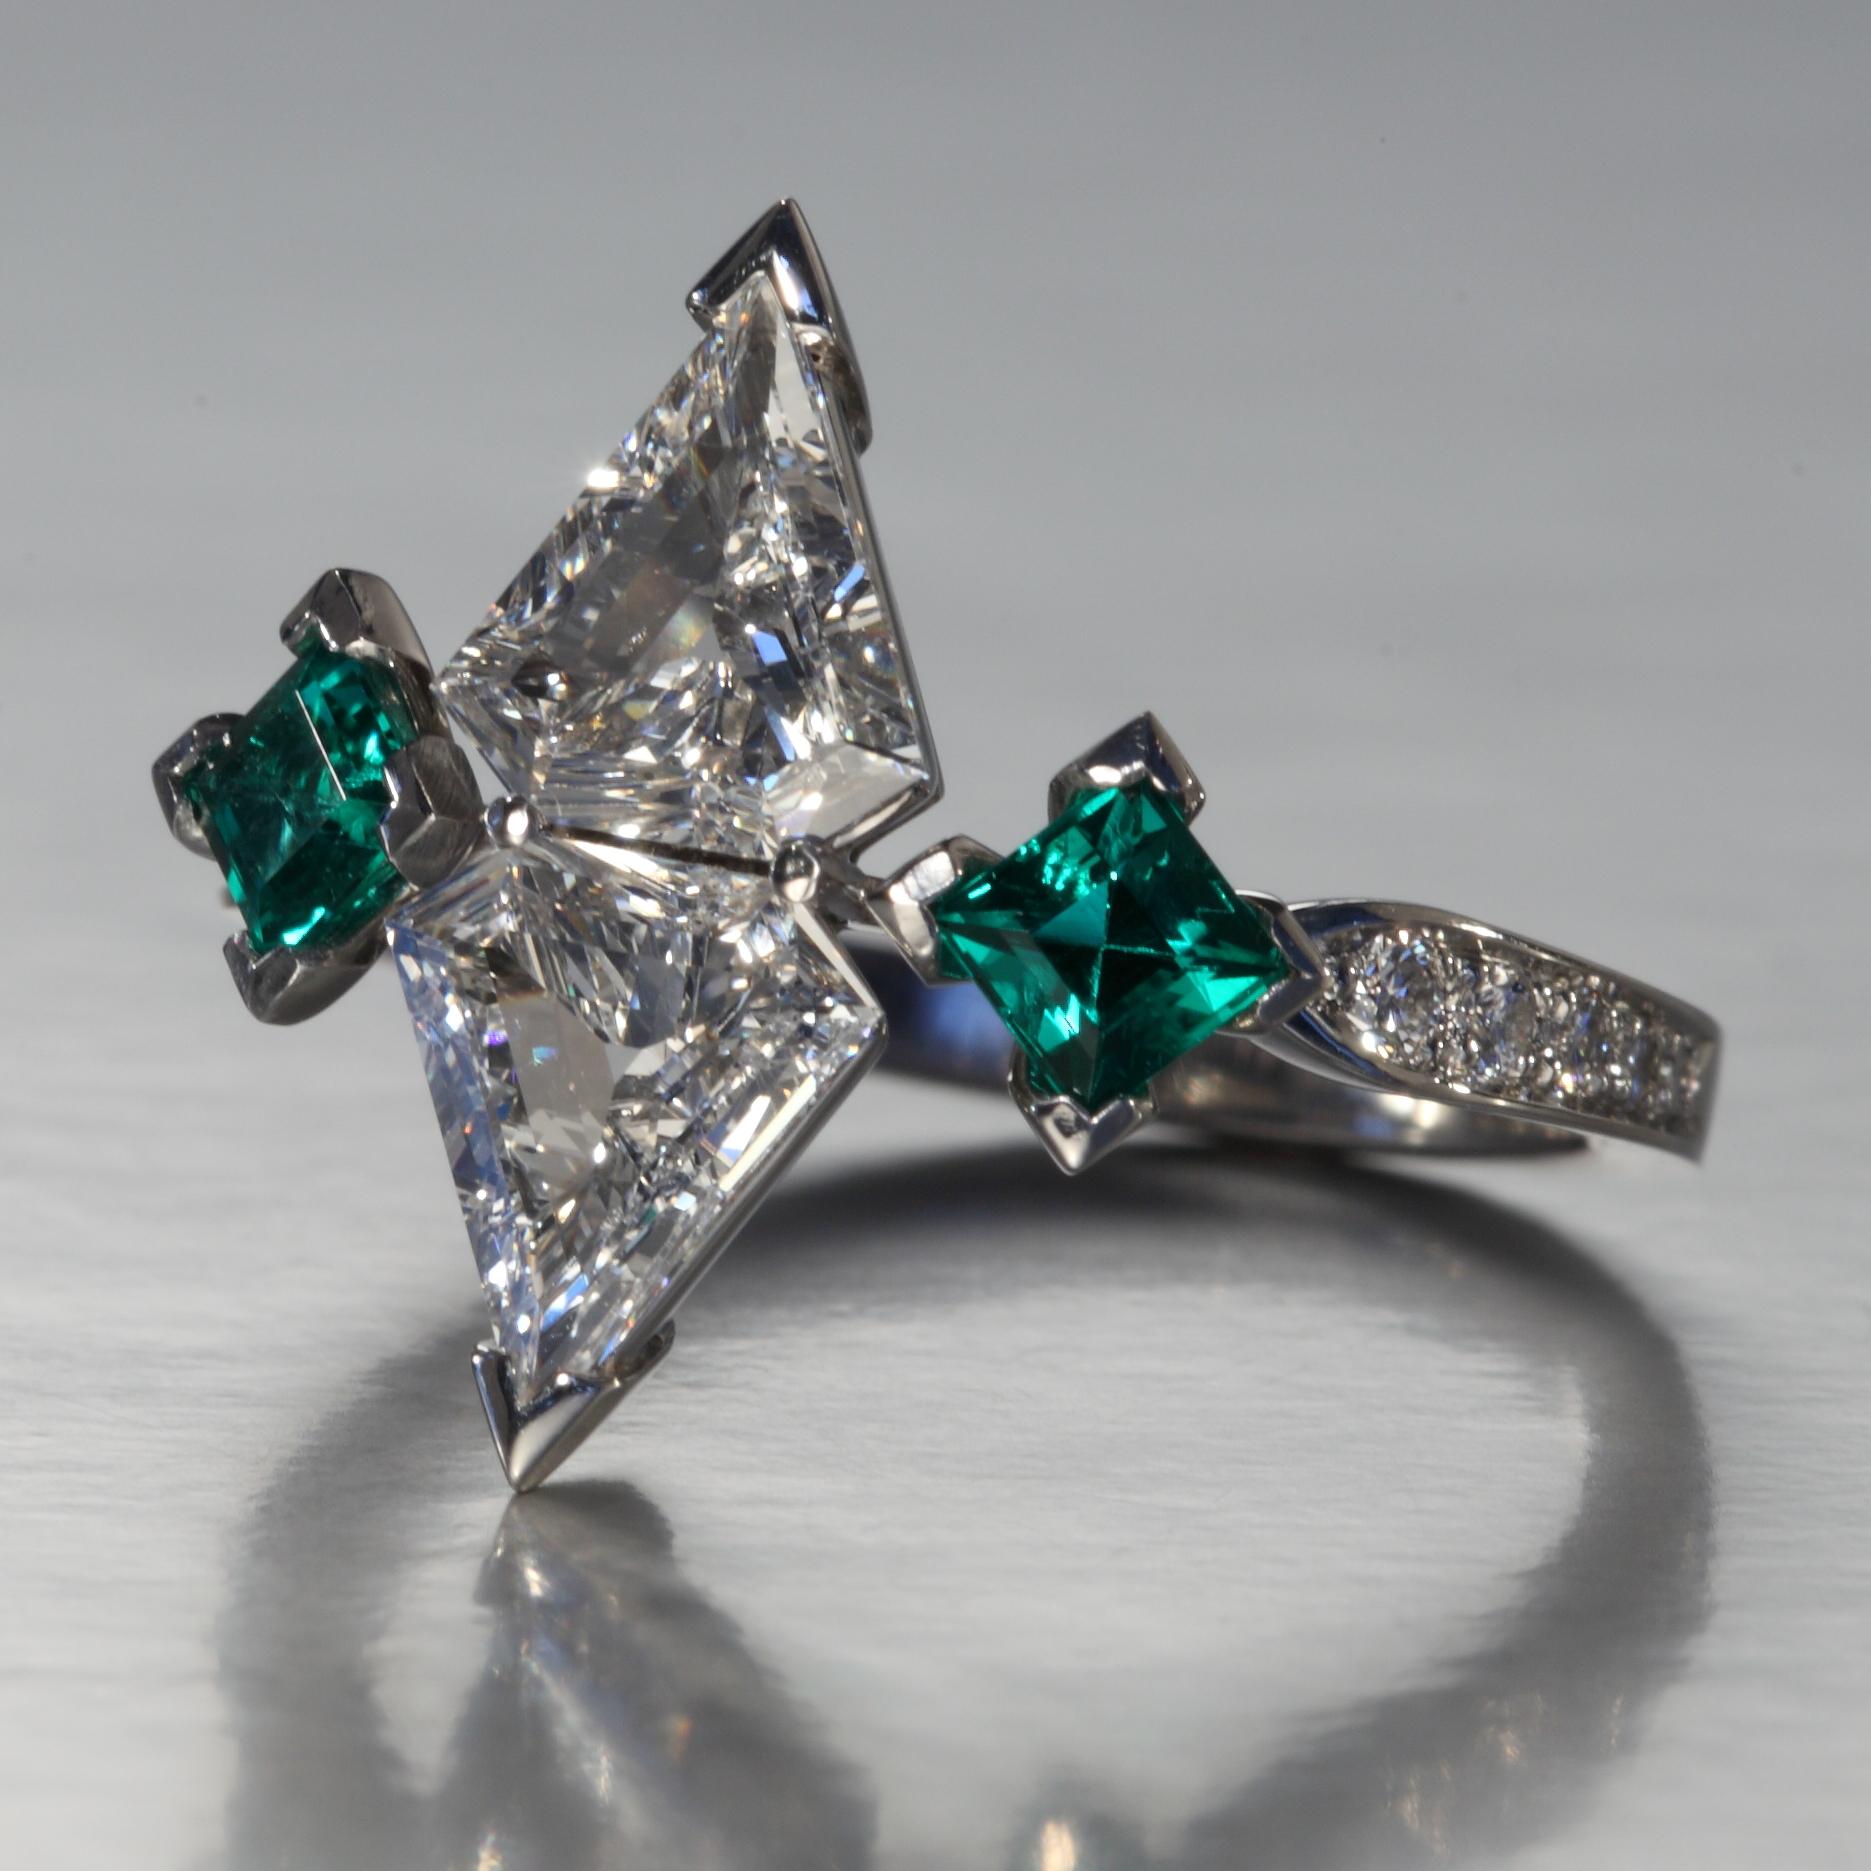 Two kite shaped diamonds with a total of 1.08 carat F,G vvs and two fine green square cut emeralds with a total of 0.39 carat are set with 0.12 carat of small round diamonds F,G vvs in a platinum ring. This one of a kind piece is designed and hand